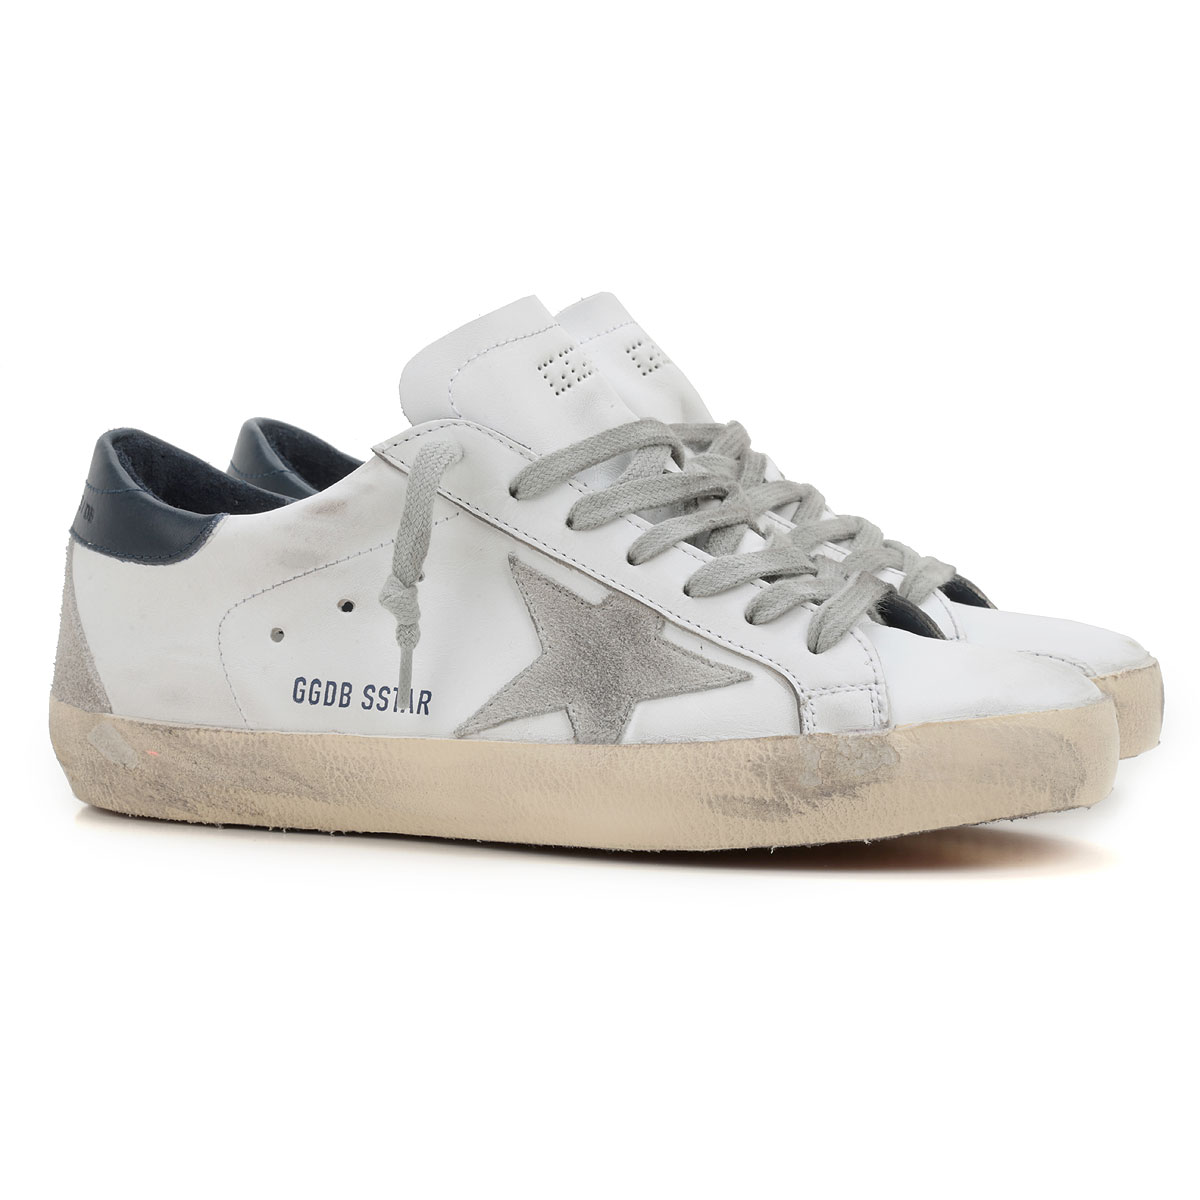 Mens Shoes Golden Goose, Style code: gc0ms590-a7-